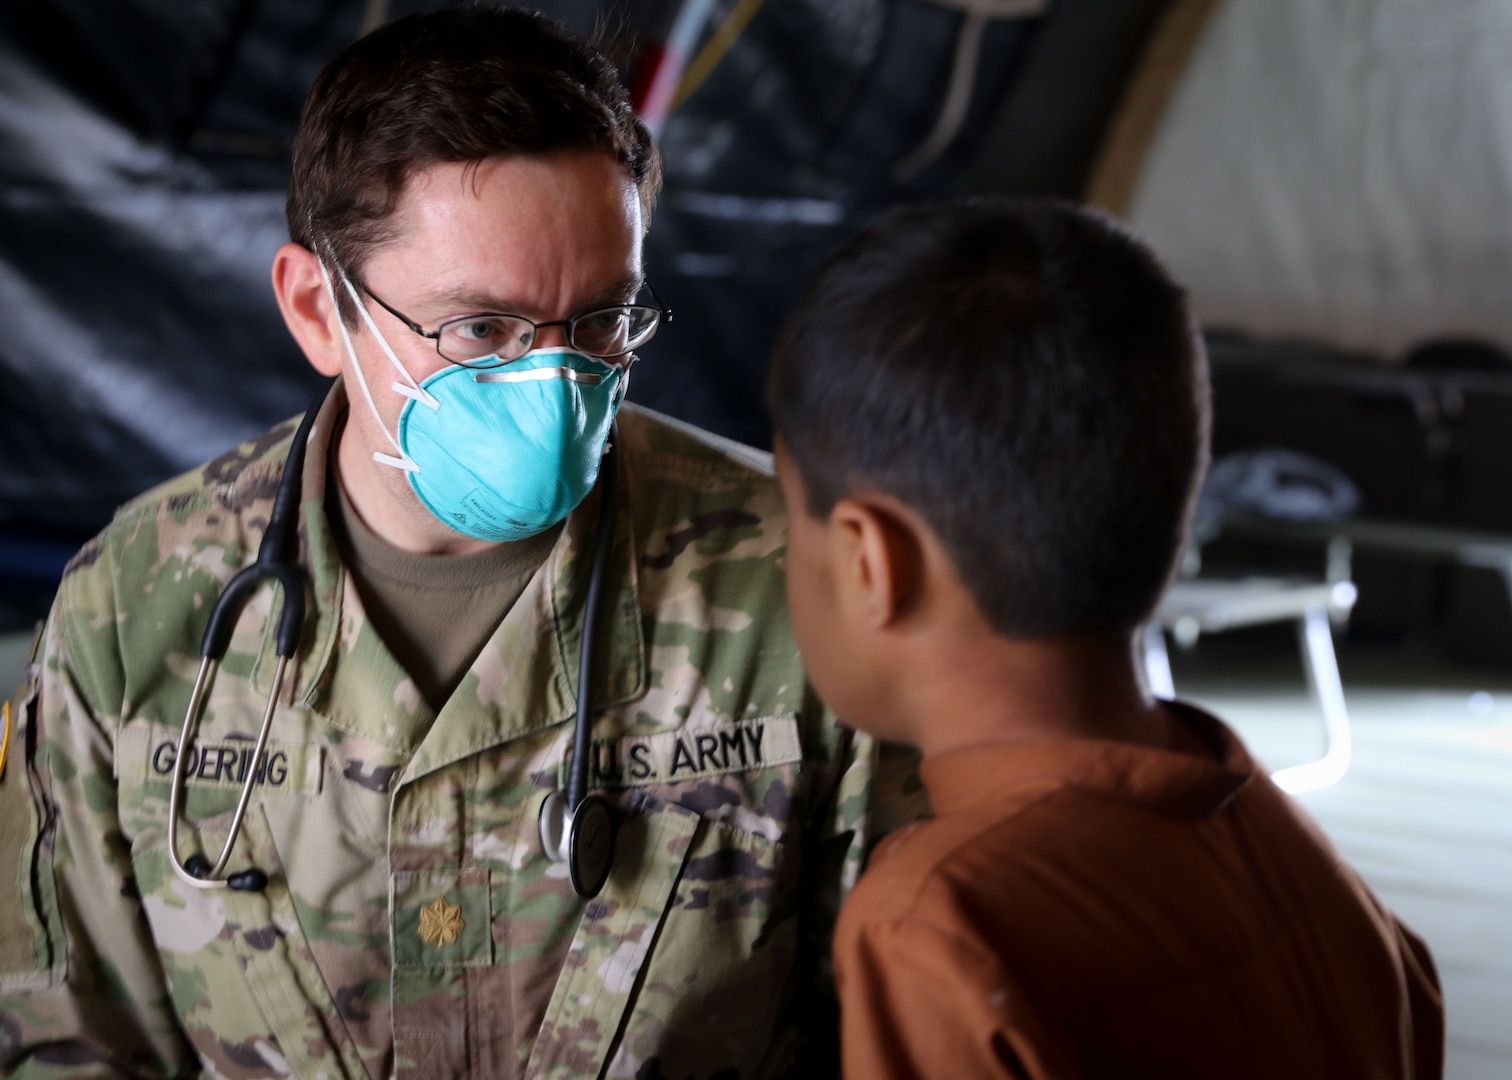 U.S. Army Medical professionals support Operation Allies Refuge